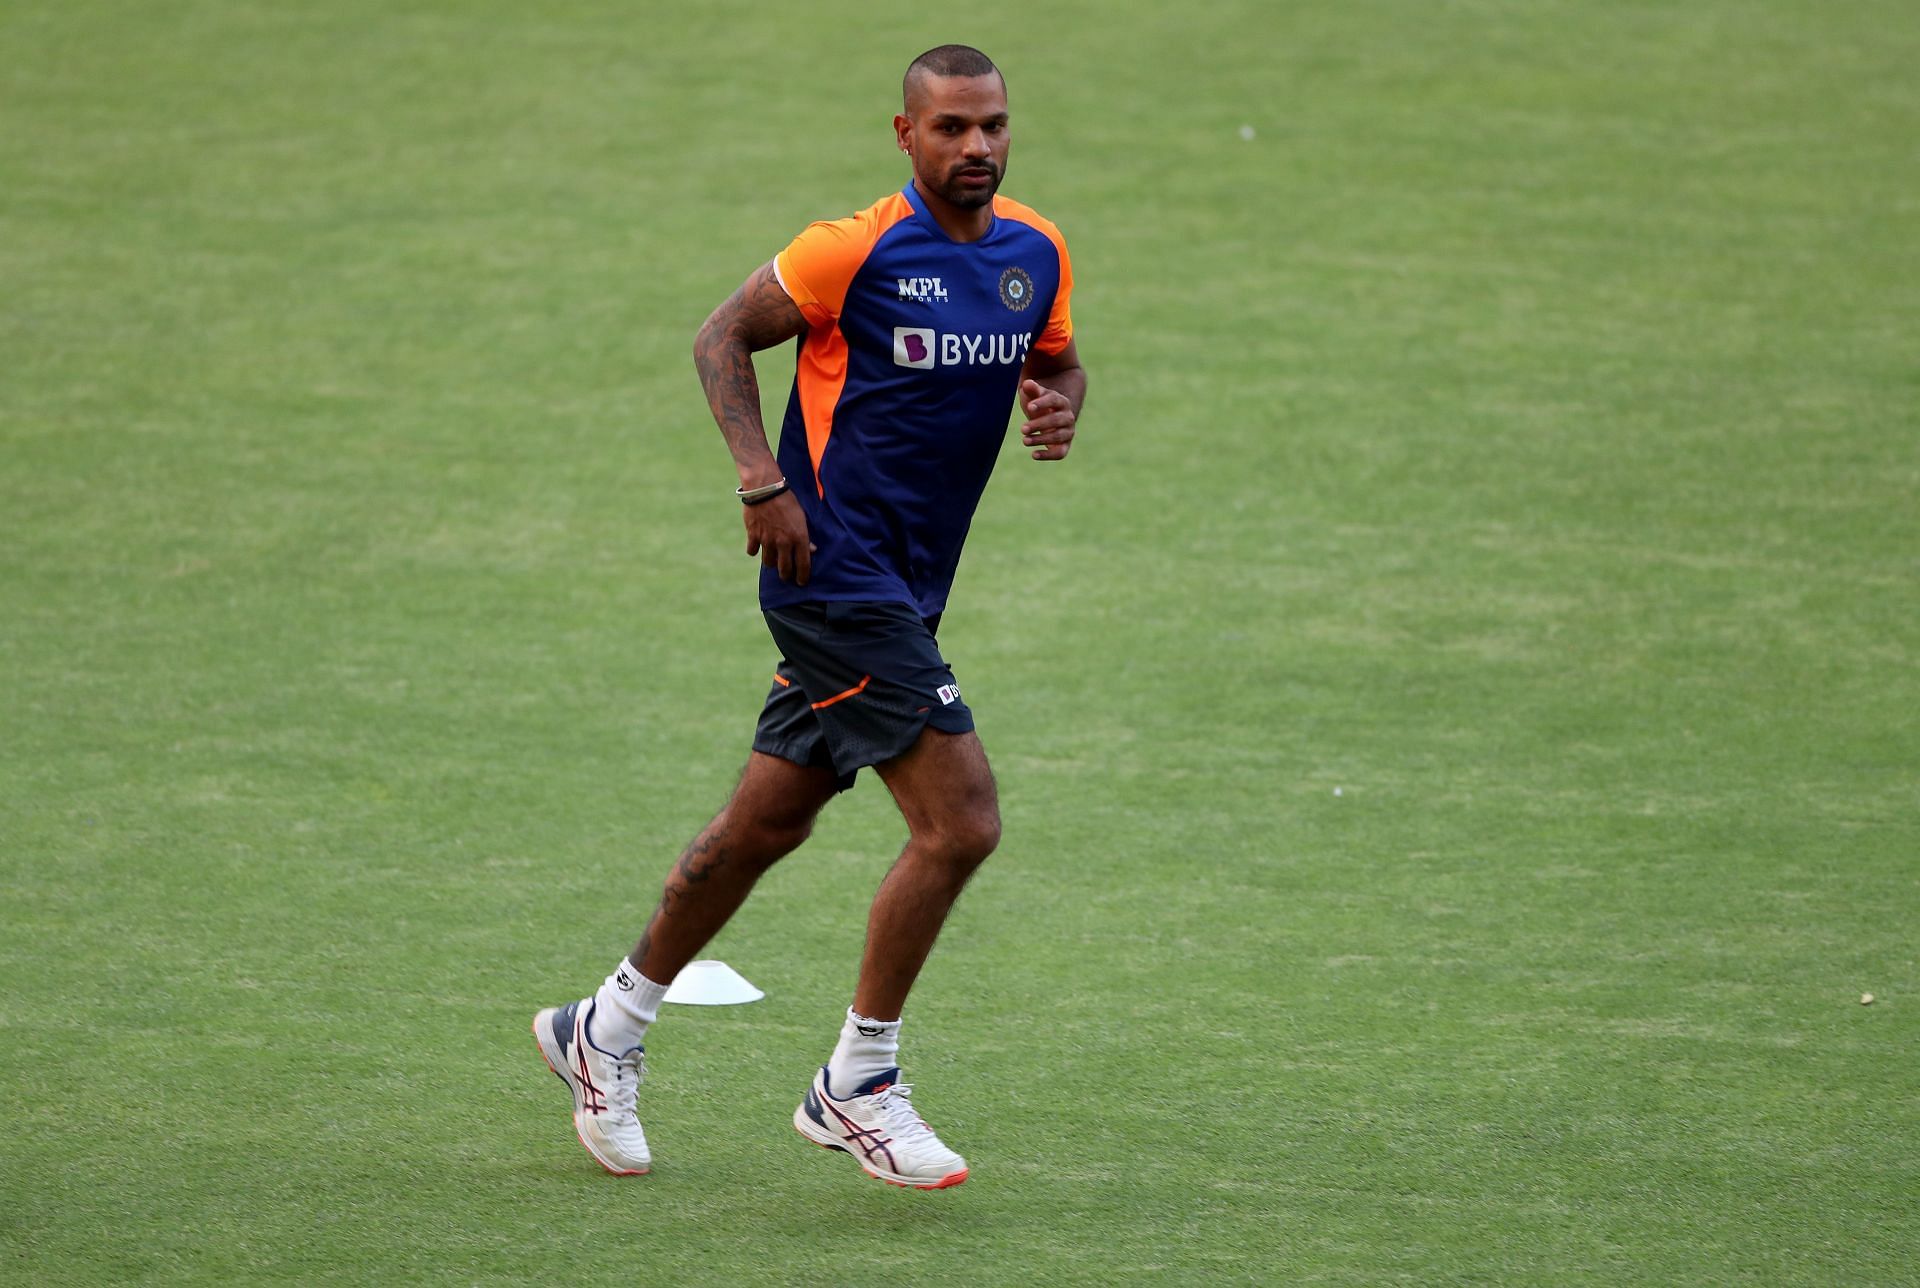 Shikhar Dhawan can be a great fit for Punjab Kings